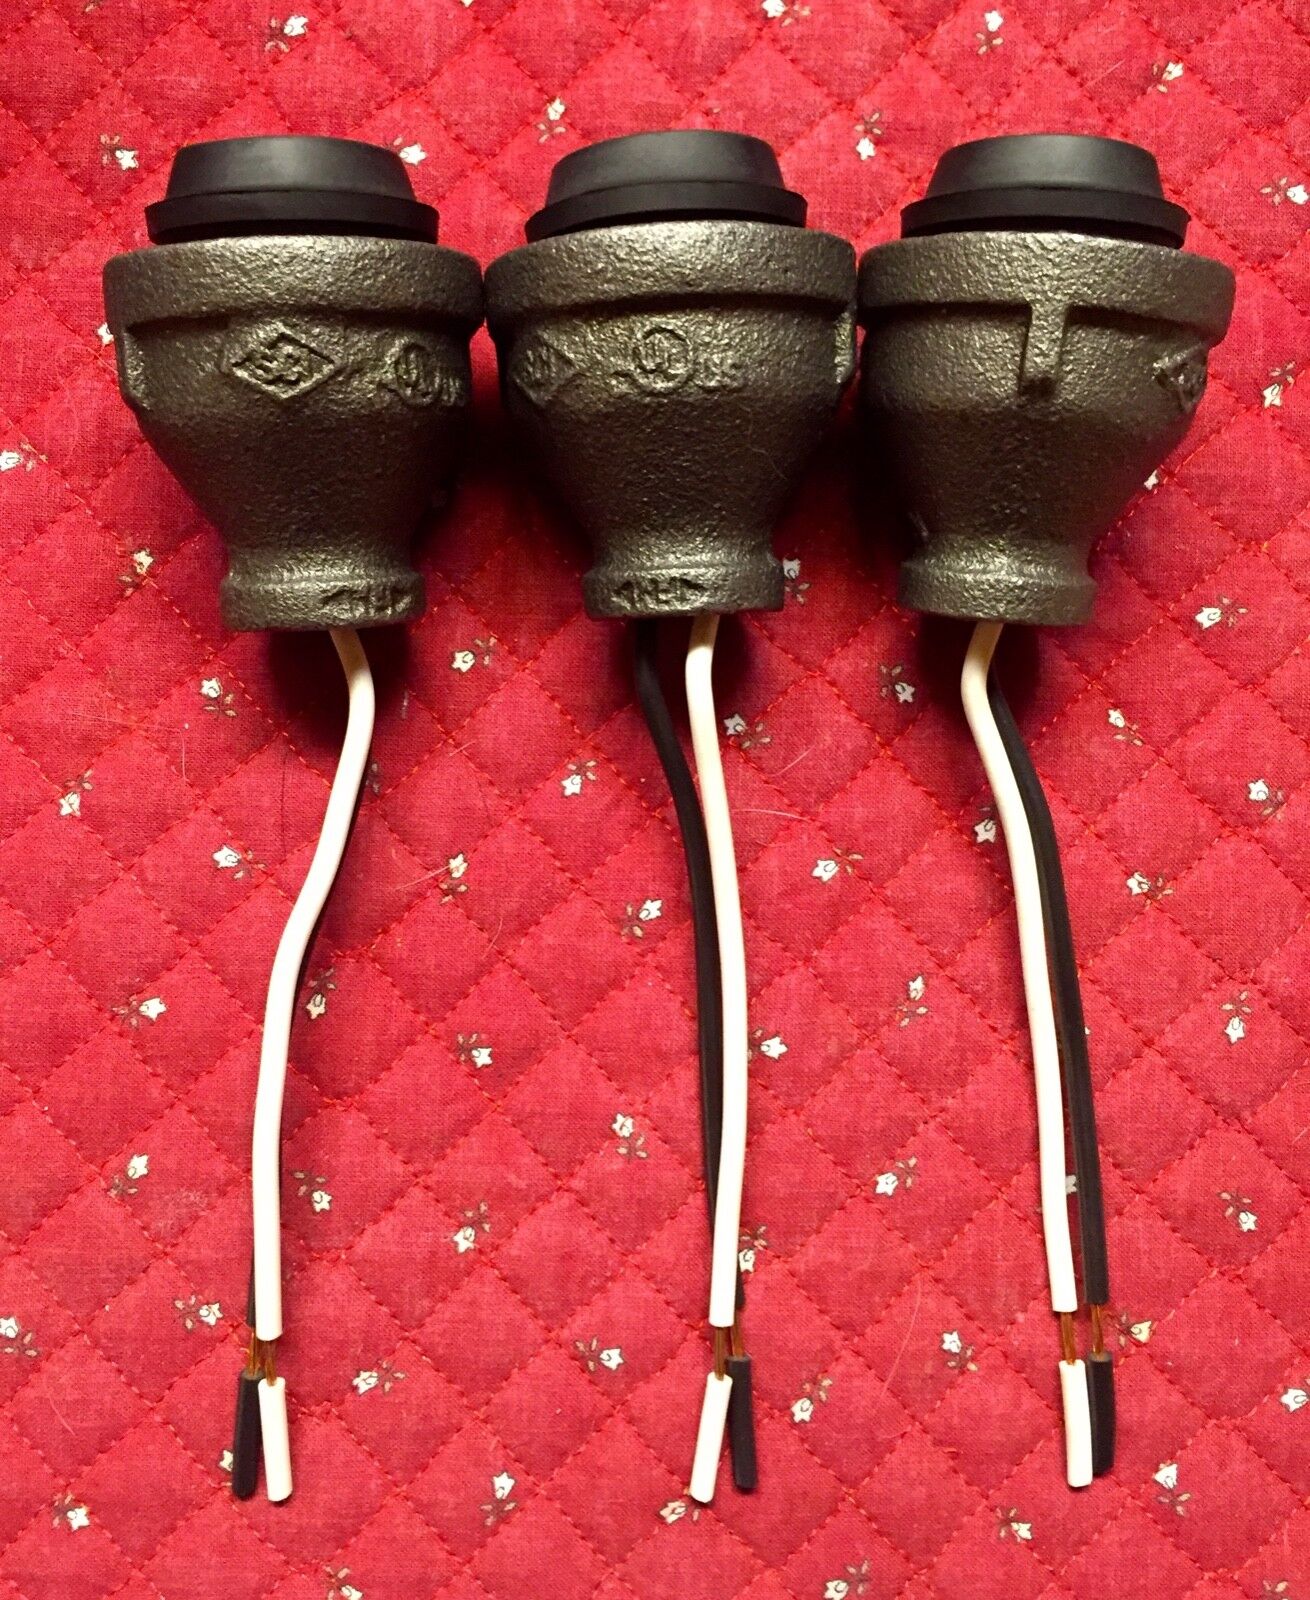 LOWEST PRICE 3 Steampunk/Industrial/Iron Pipe-Lamp/Light Sockets 1-1/4